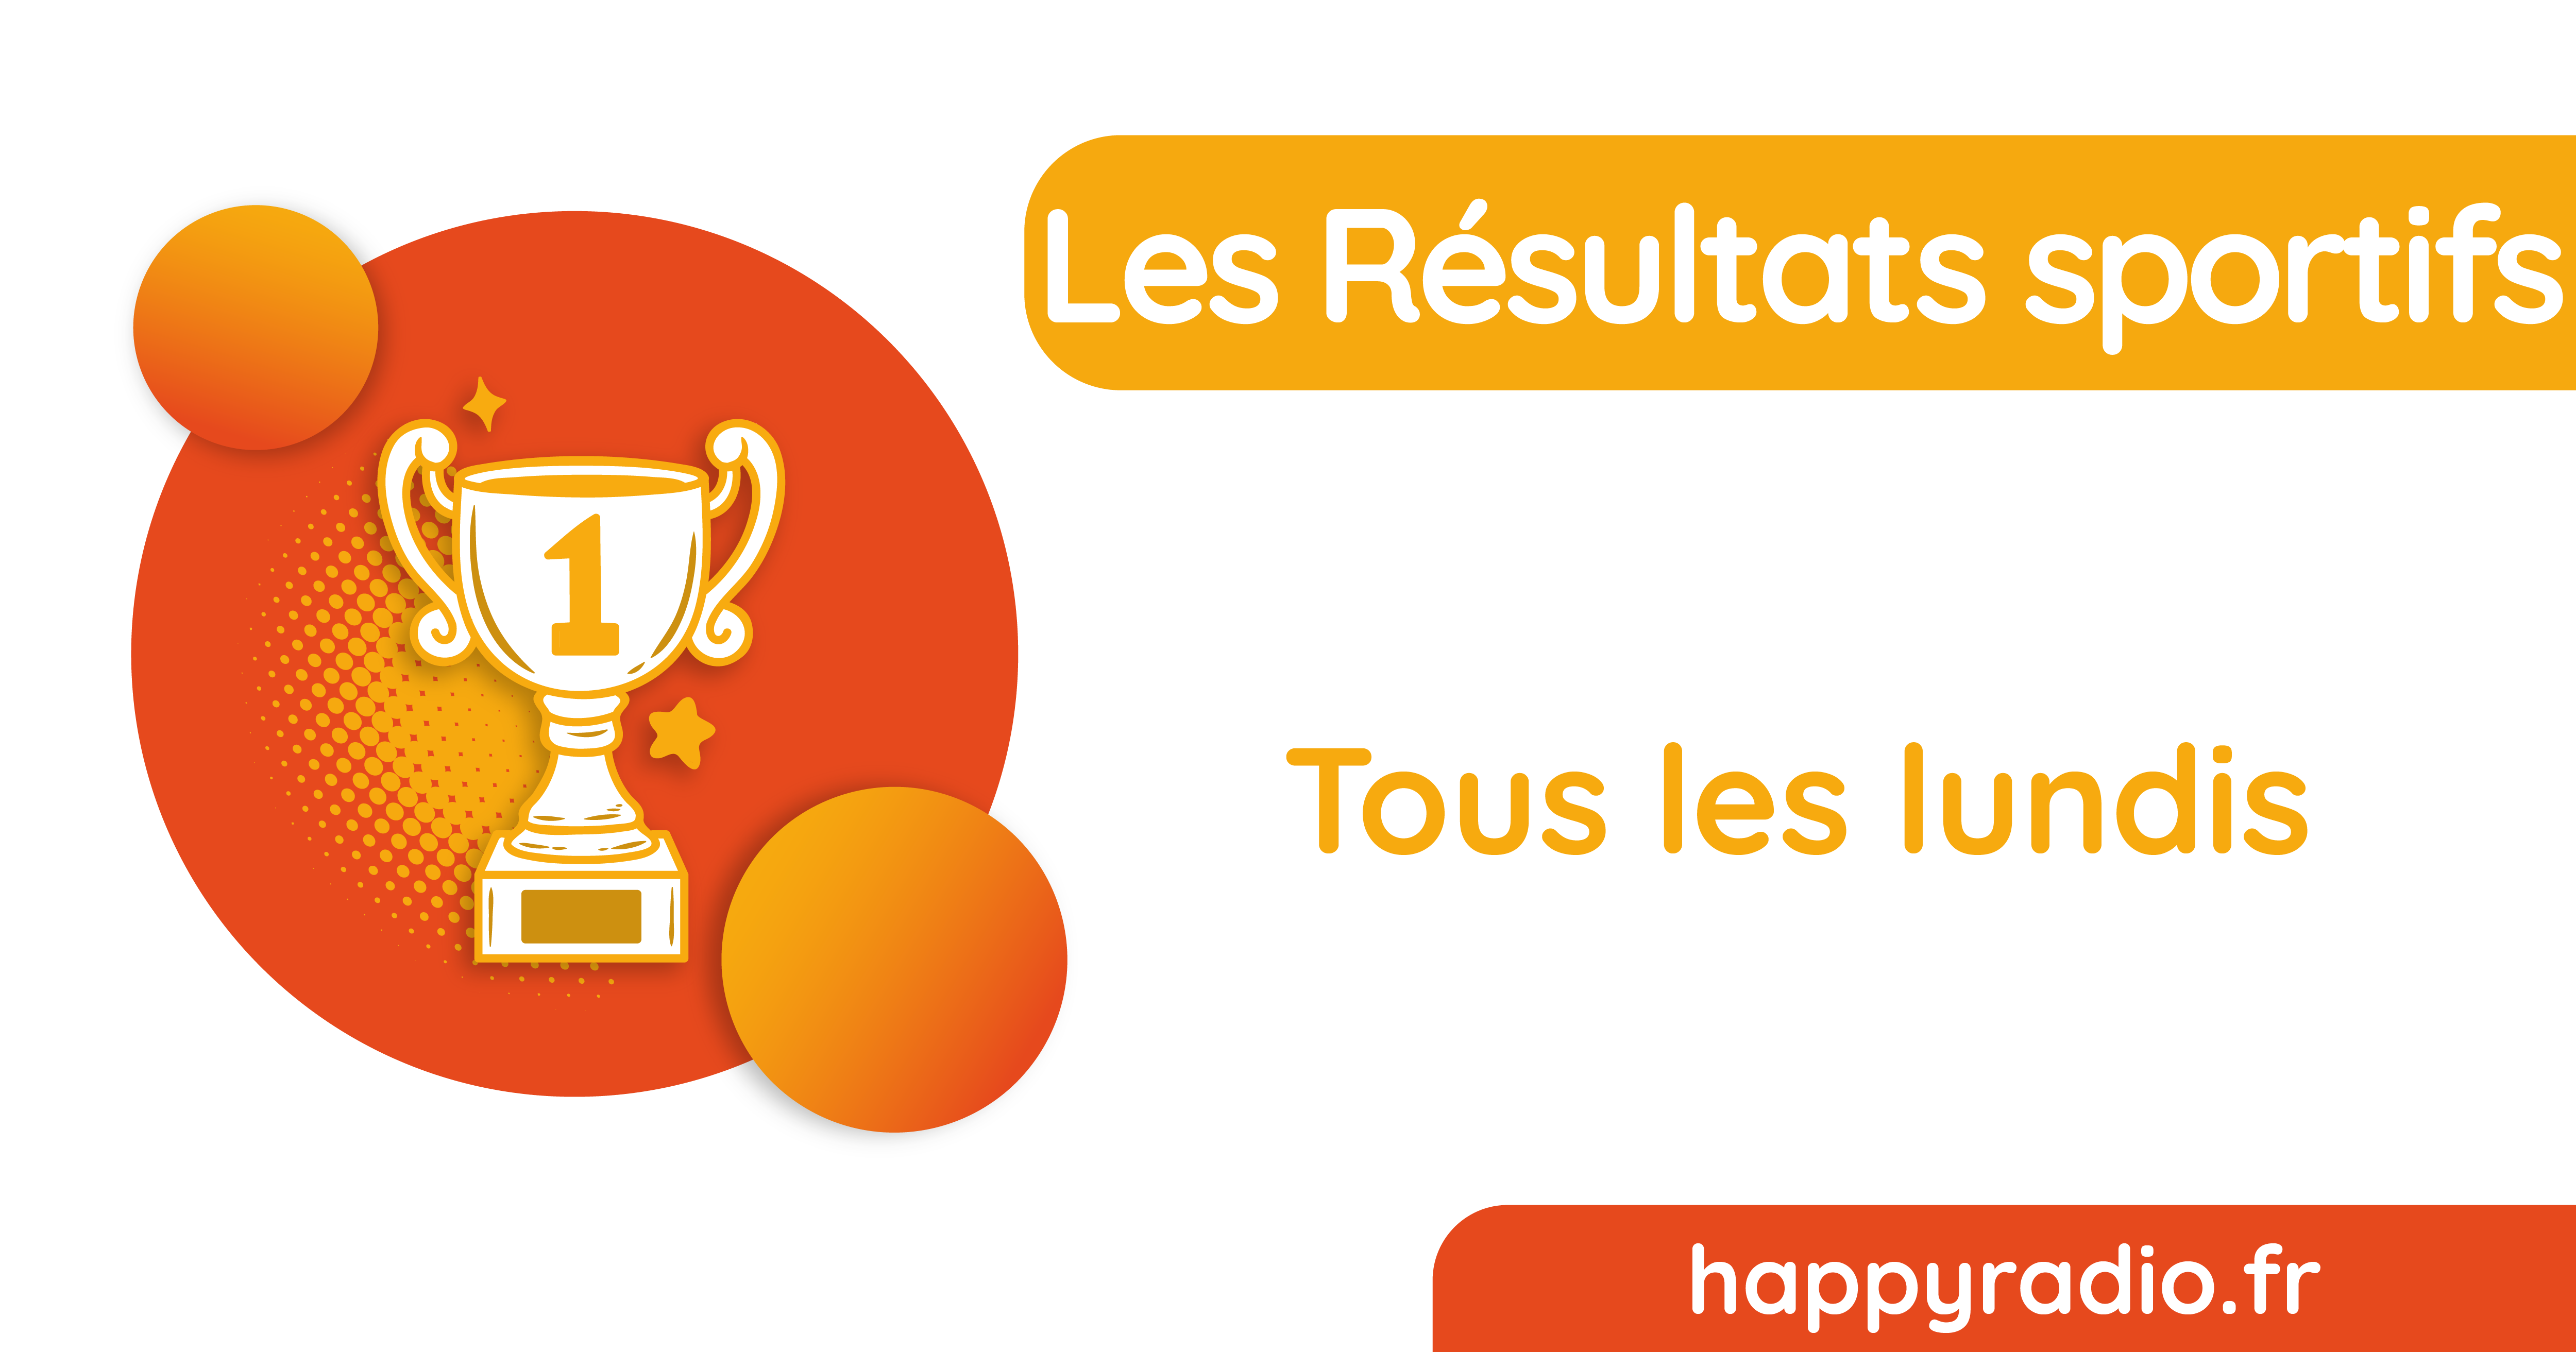 You are currently viewing Les Résultats sportifs